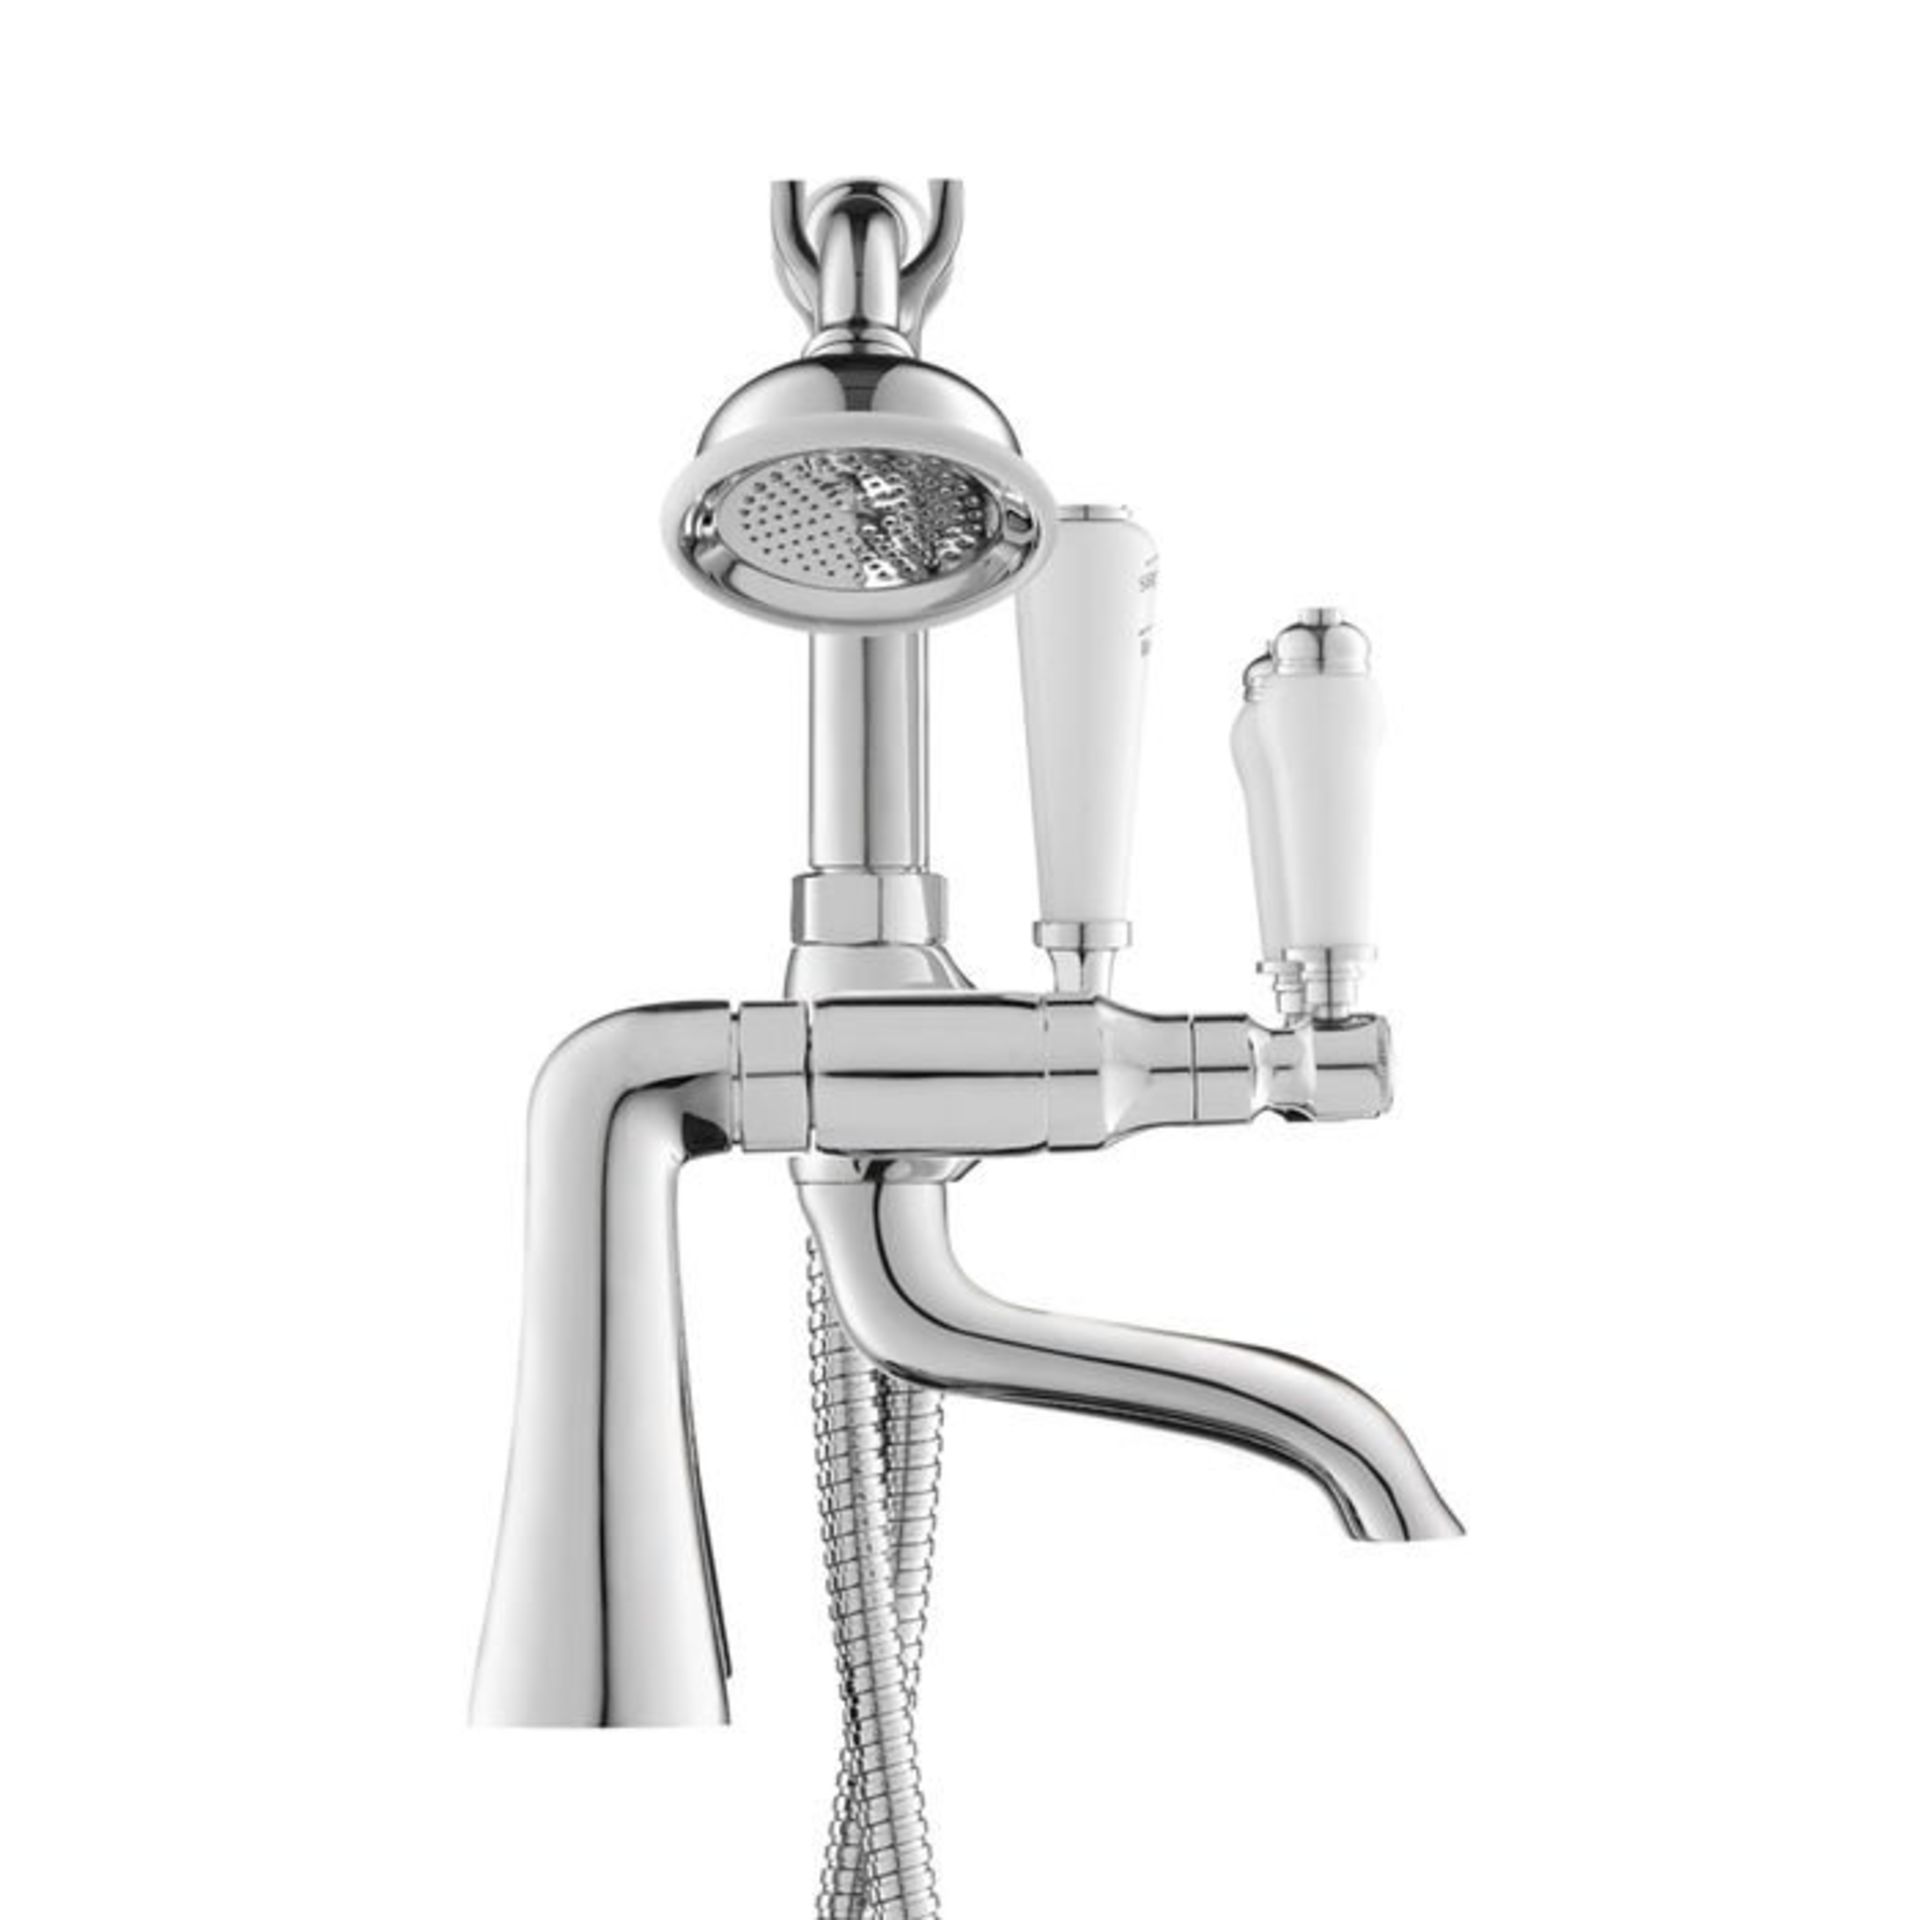 (G29) Regal Chrome Traditional Bath Mixer Lever Tap with Hand Held Shower RRP £179.99 Chrome - Image 5 of 6